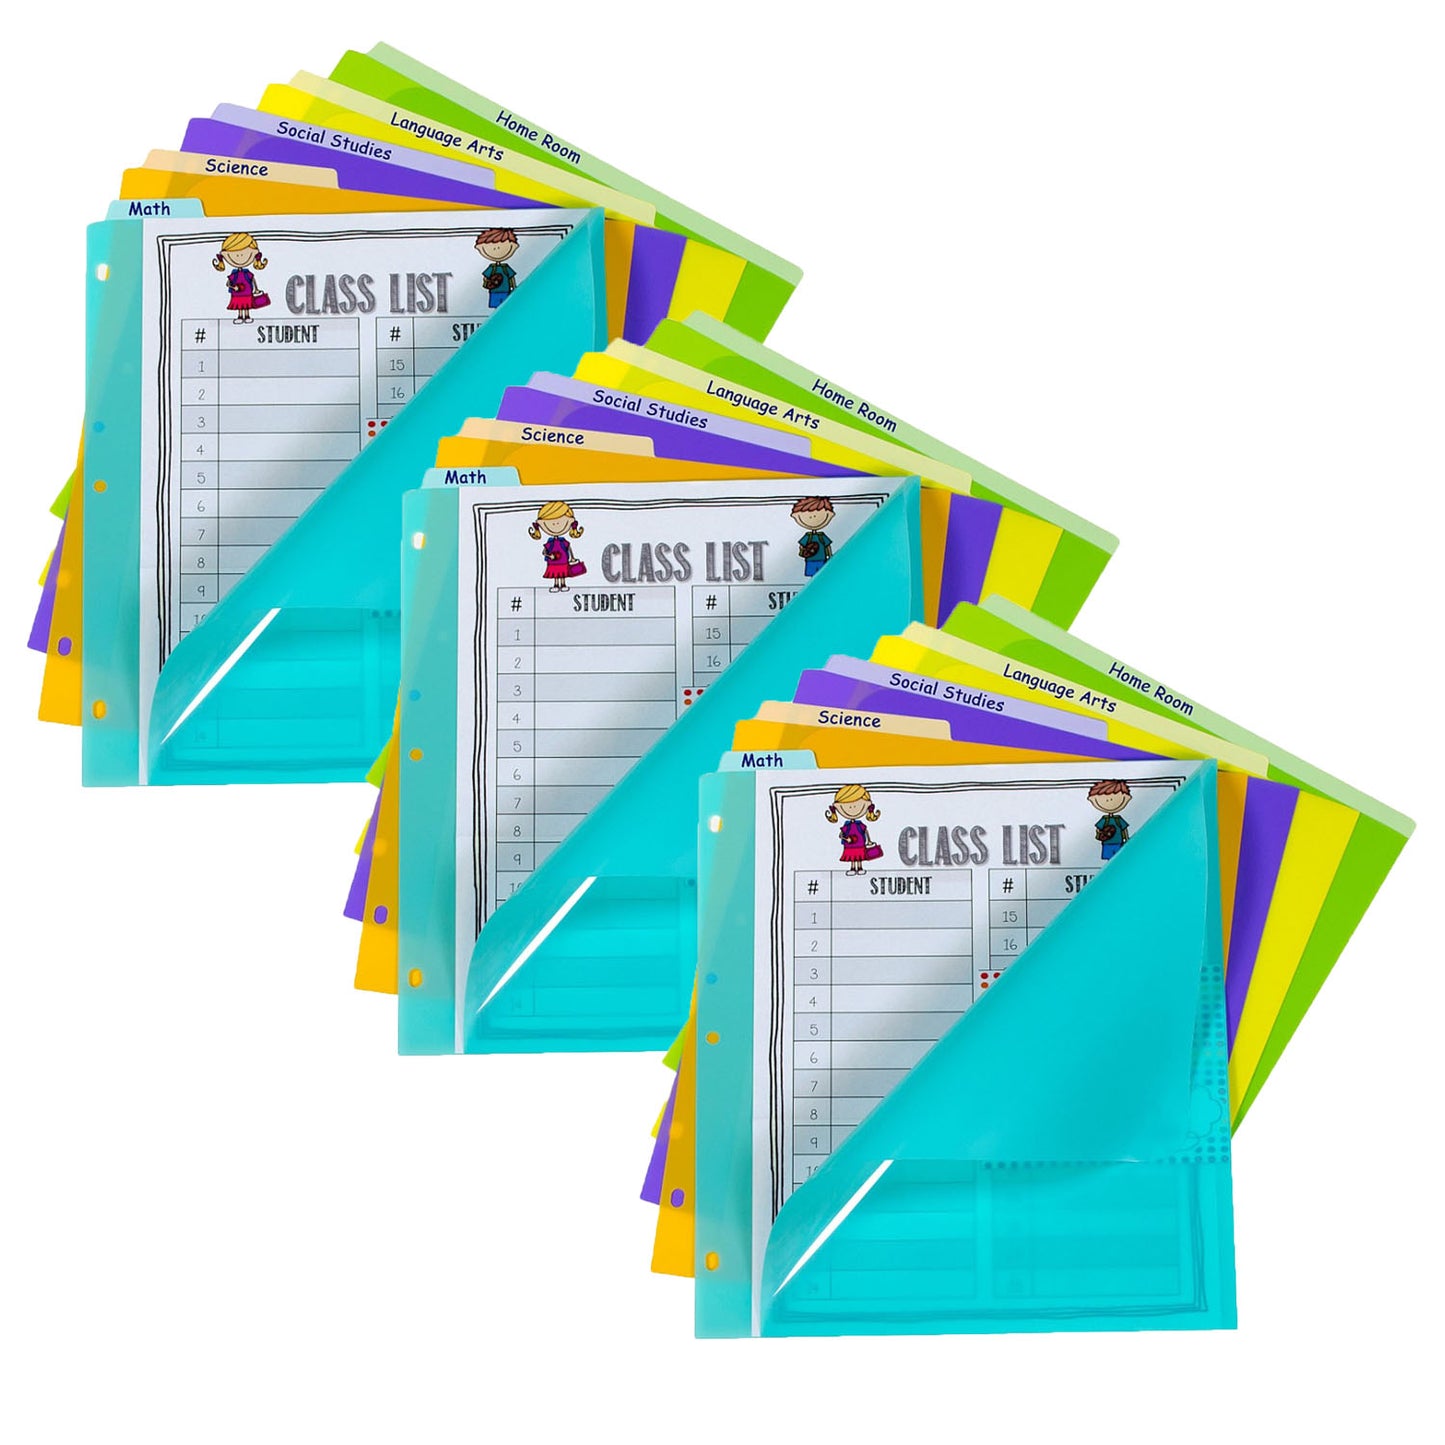 5-Tab Index Dividers with Vertical Tab, Bright Color Assortment, 8-1/2 x 11, 3 Sets